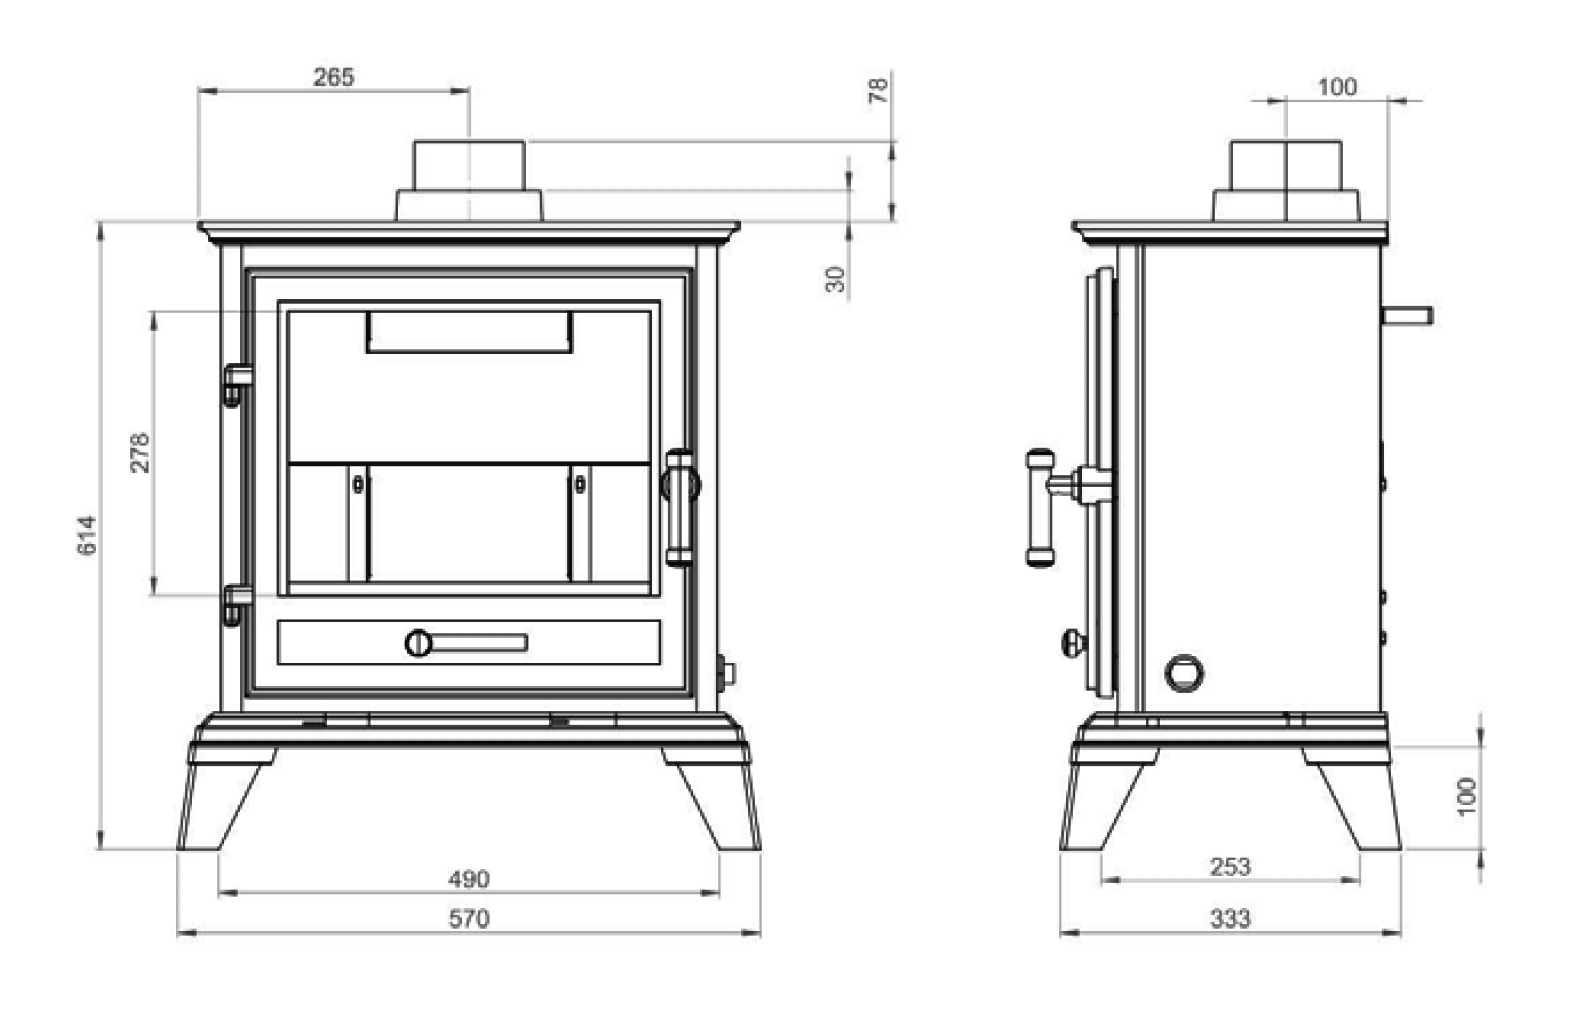 Gallery Classic Eco Gas Stove Dimensions